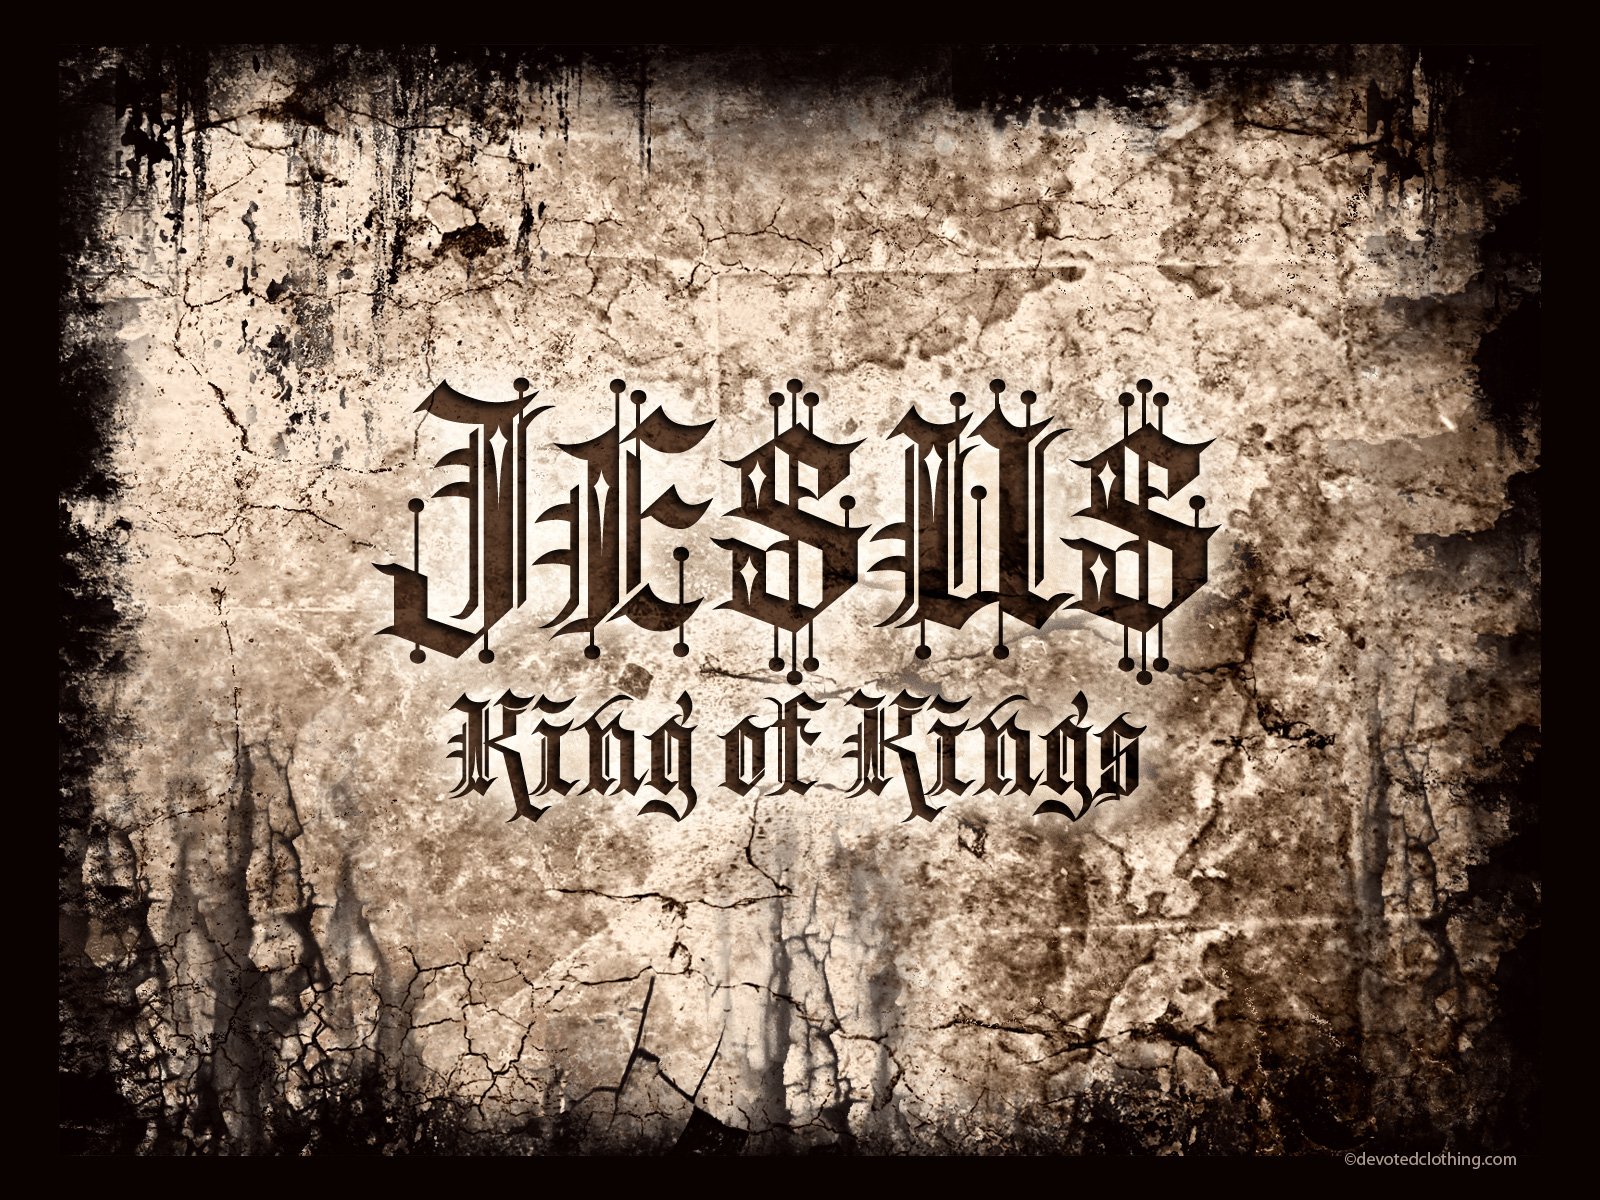 50+ Jesus HD Wallpapers and Backgrounds